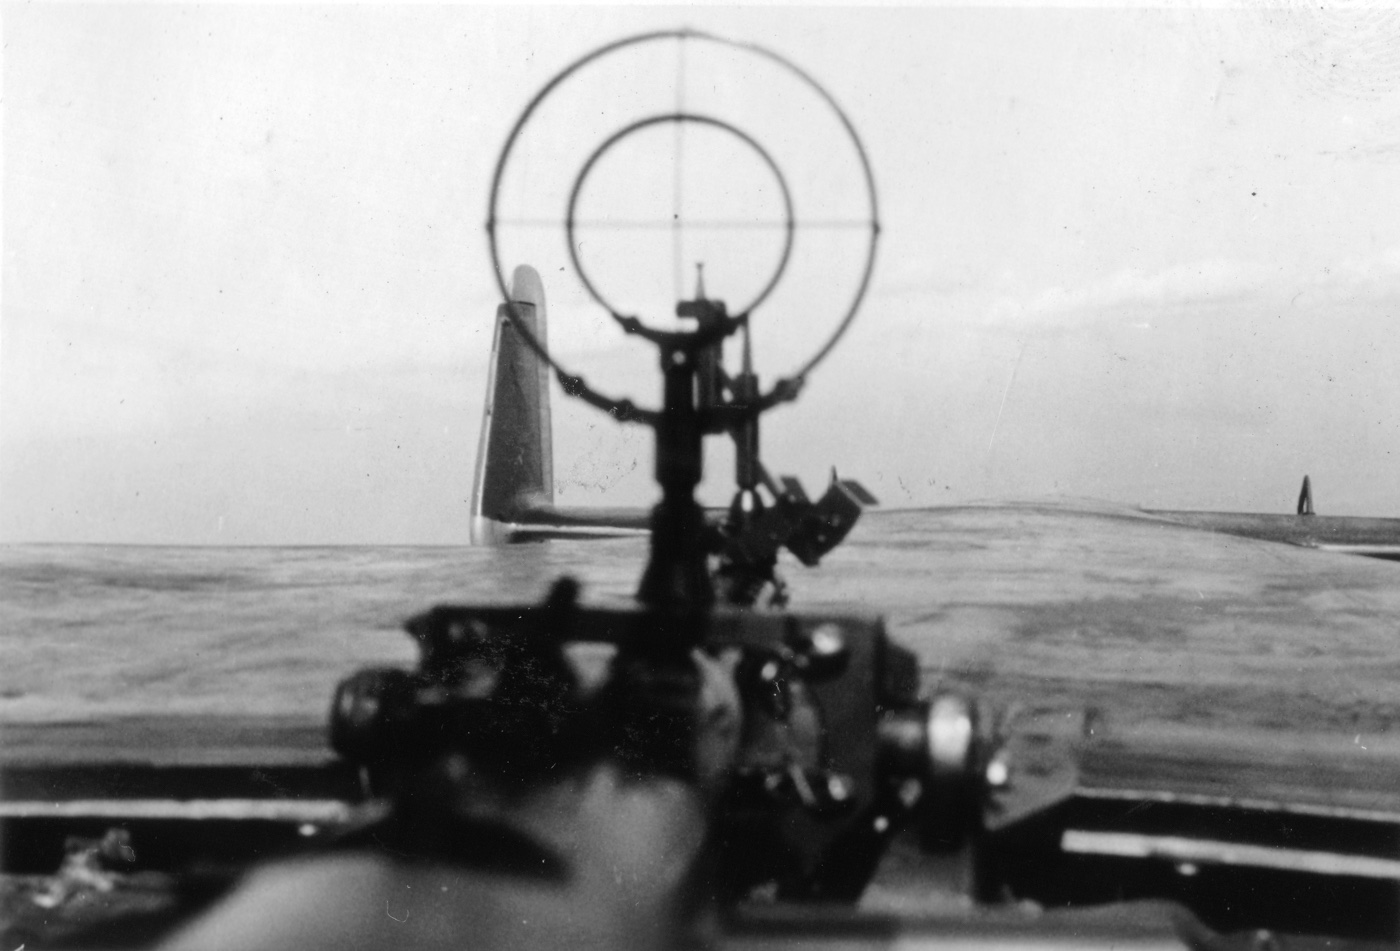 This photograph gives us a first person view of a MG15 sight in rear of Do17.